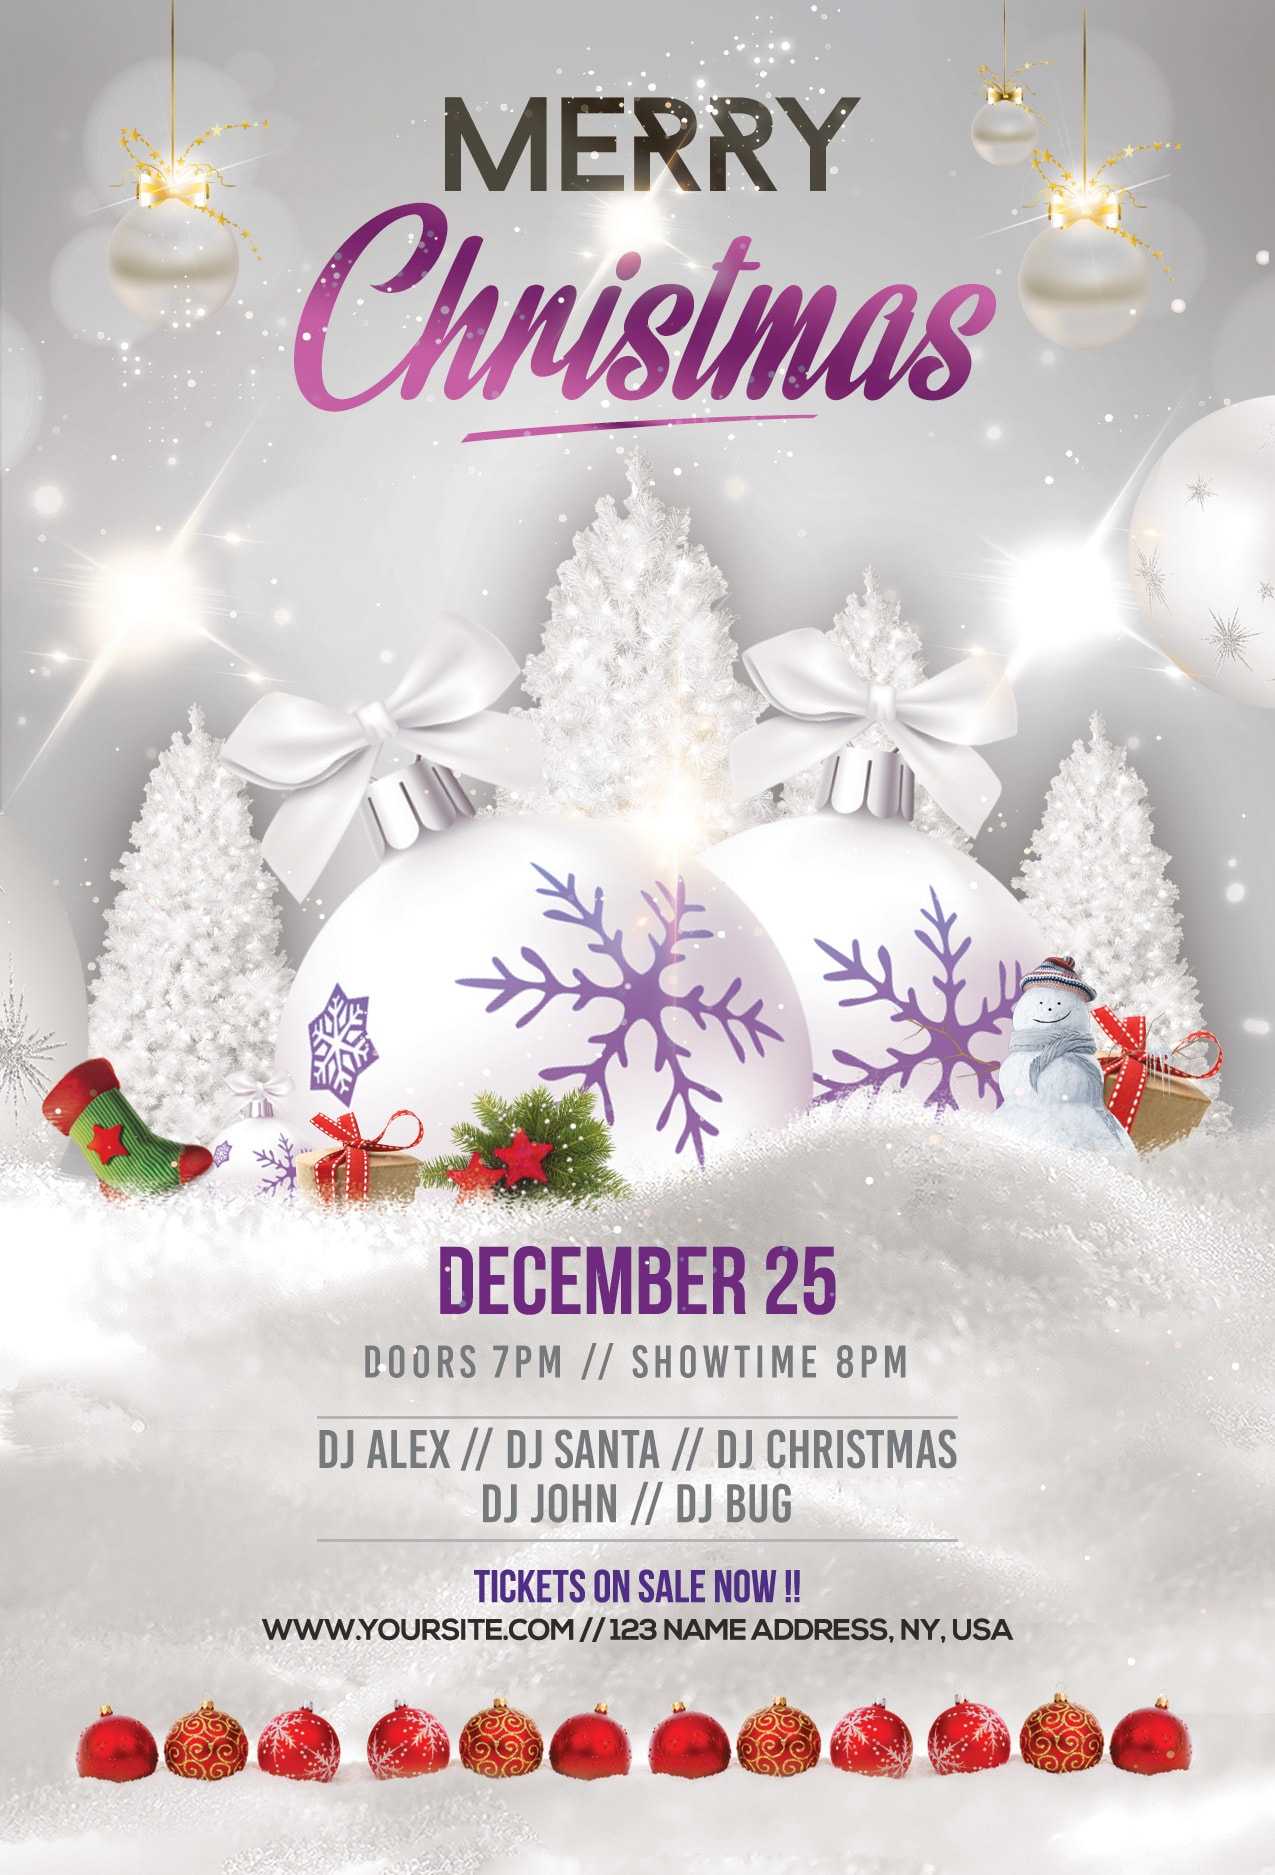 Merry Christmas & Holiday Free Psd Flyer Template - Stockpsd With Regard To Christmas Brochure Templates Free